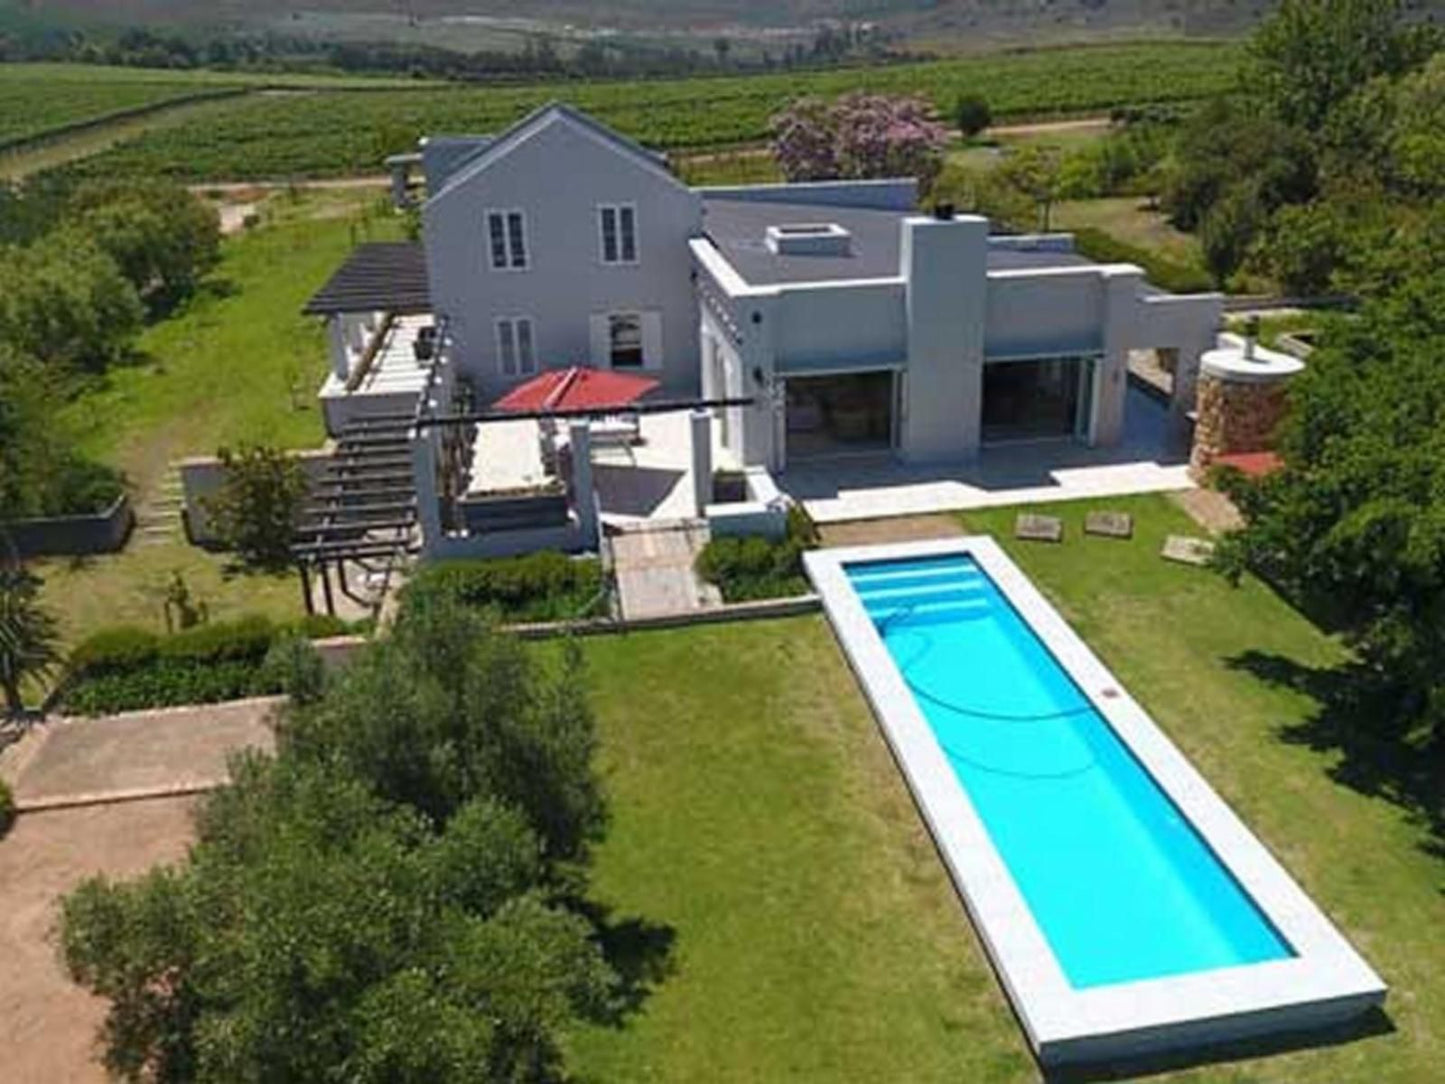 South Hill Guesthouse Bot River Western Cape South Africa House, Building, Architecture, Swimming Pool